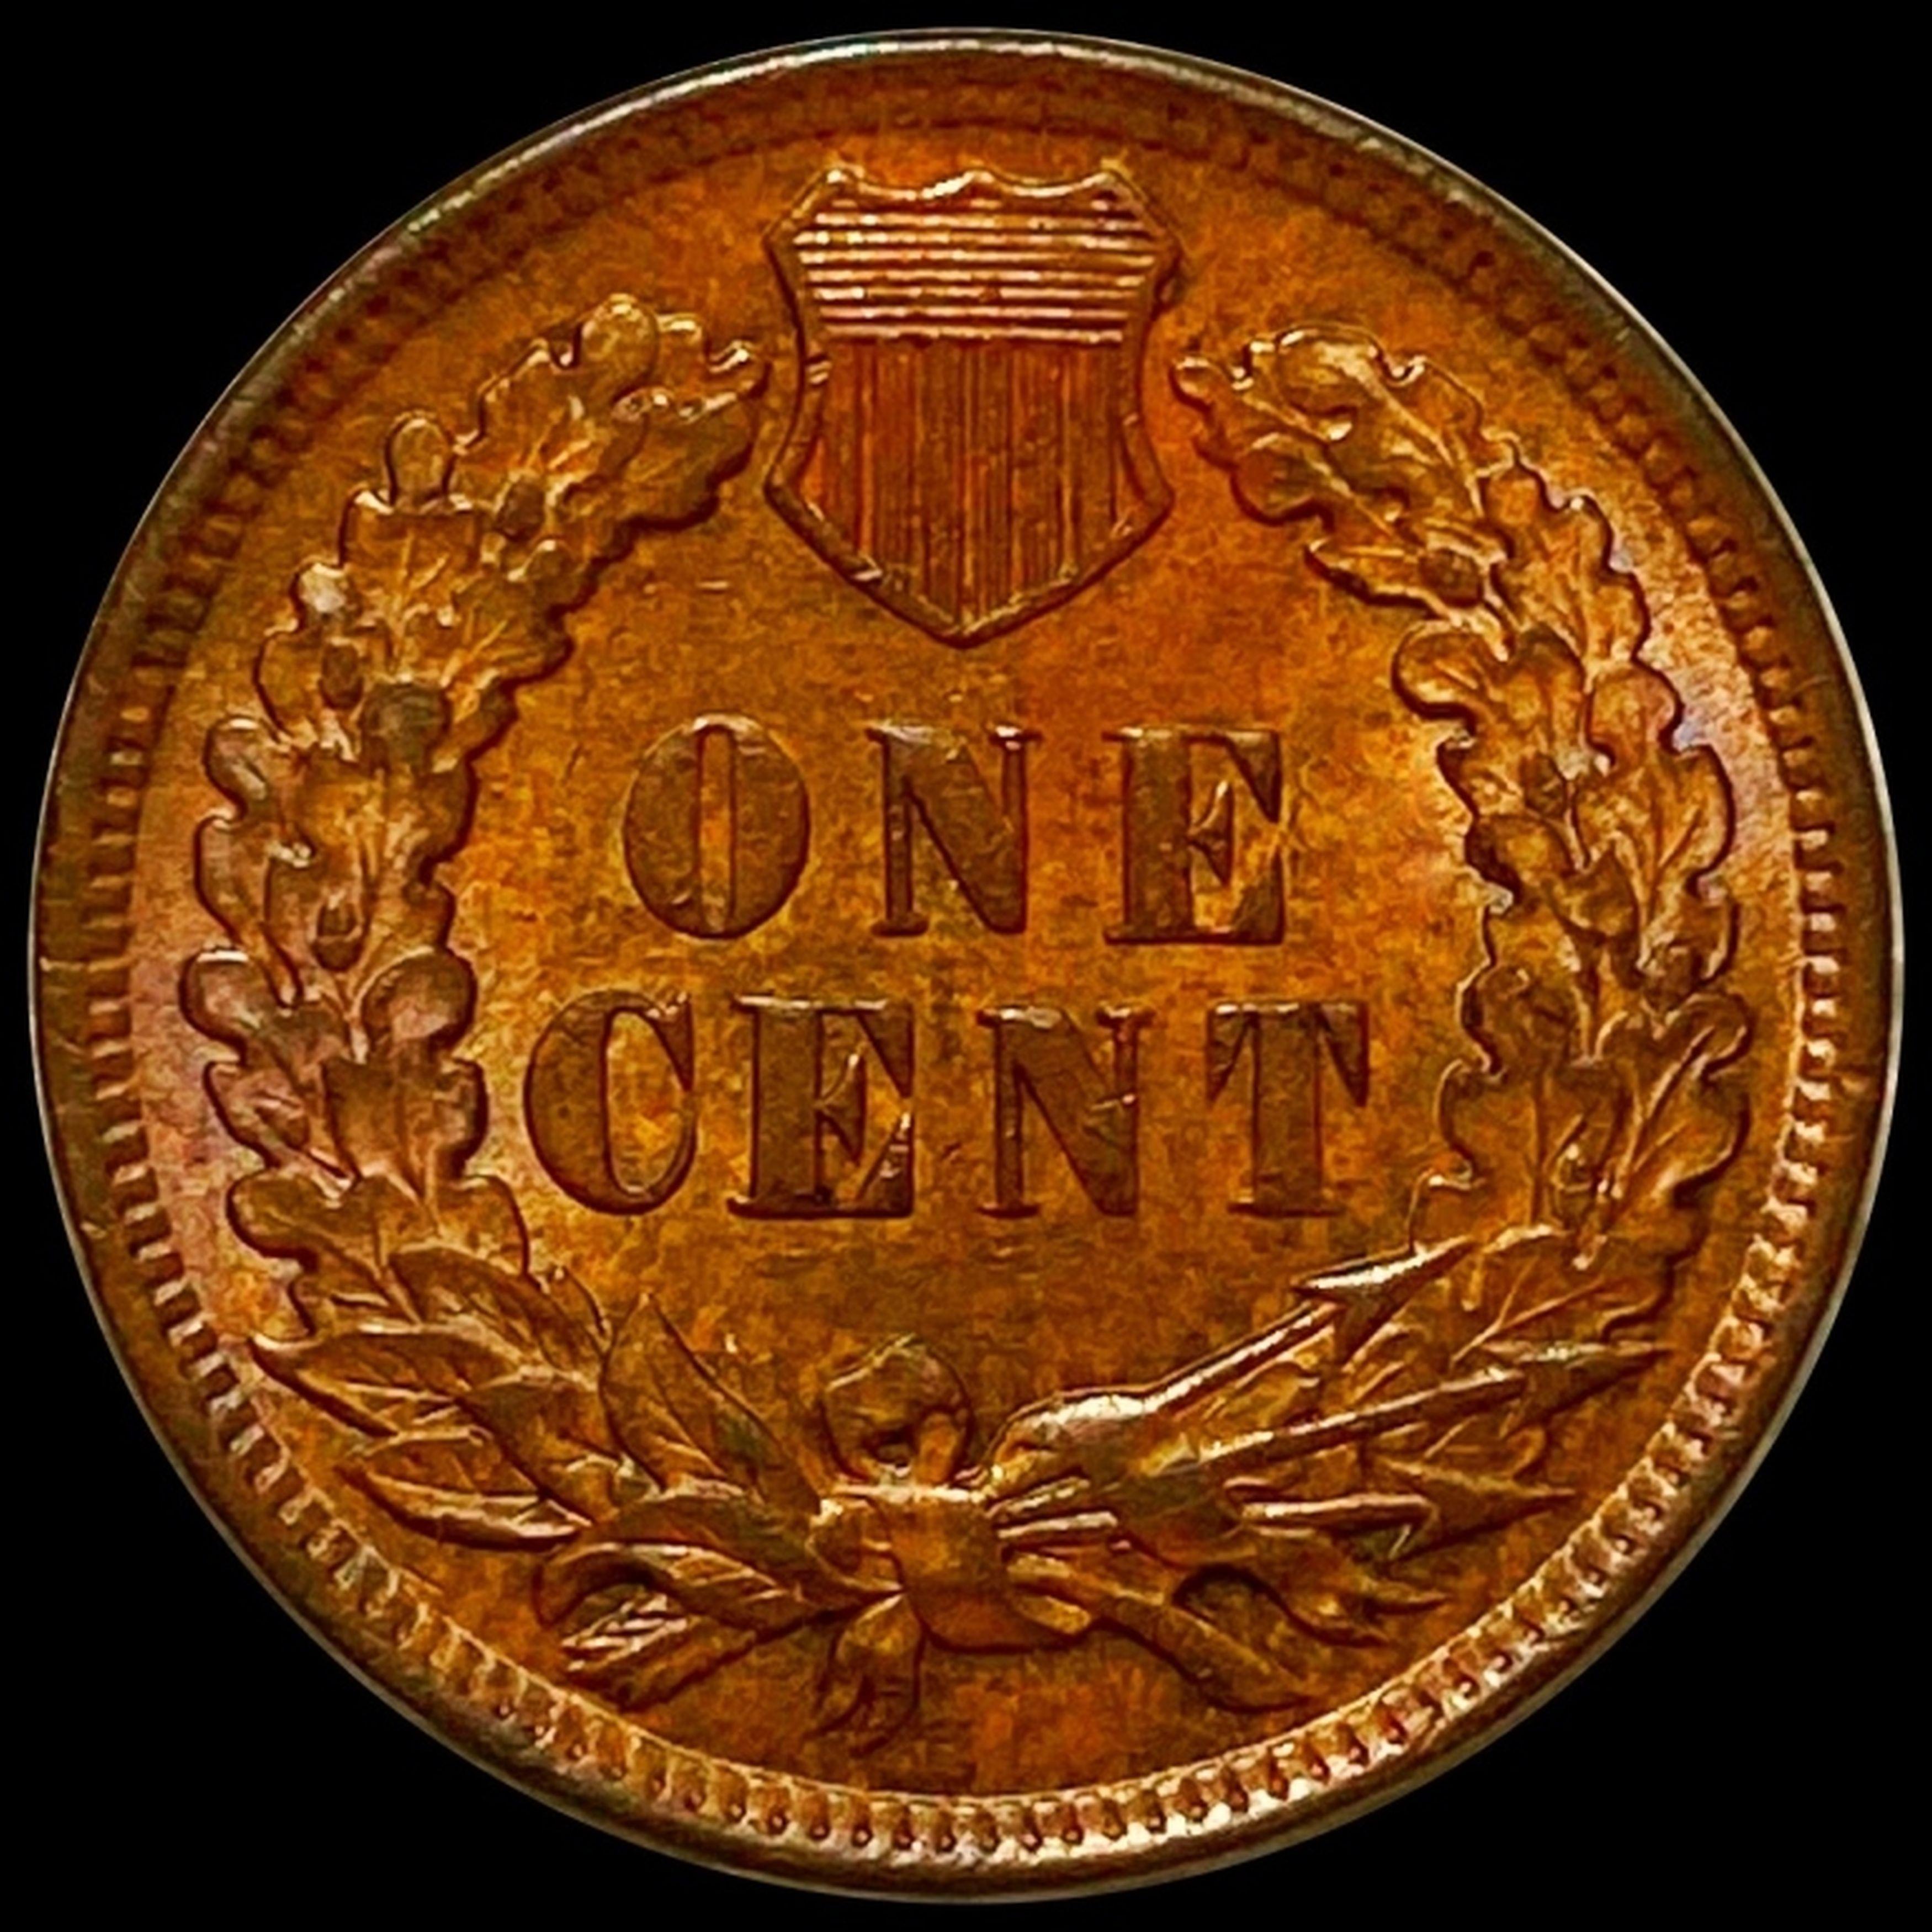 1906 Indian Head Penny CLOSELY UNCIRCULATED